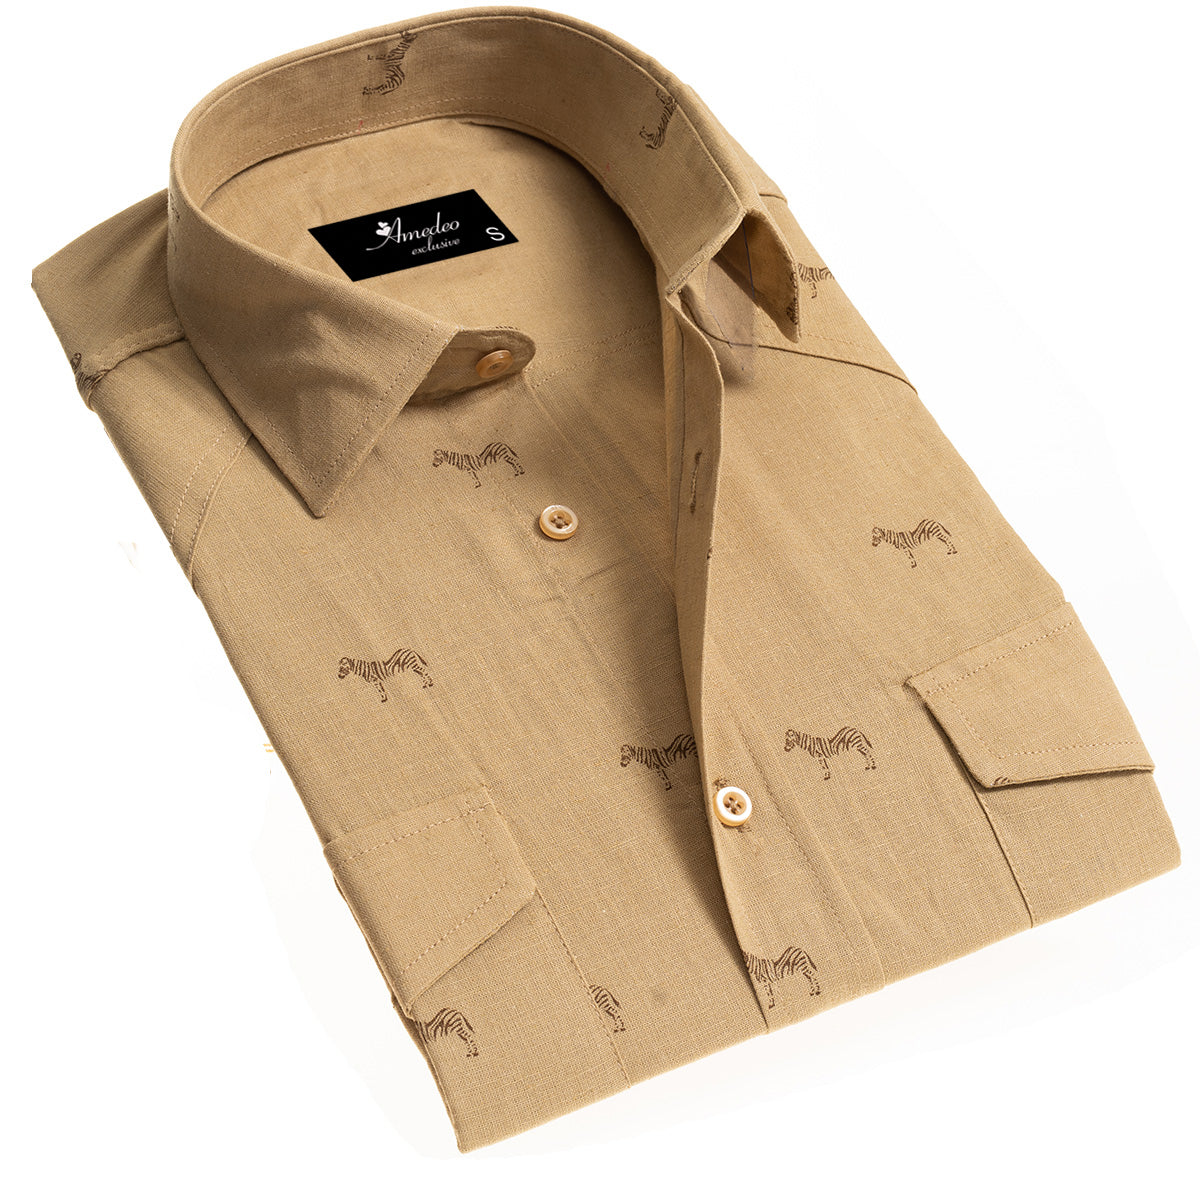 Solid Tan Safari Mens Slim Fit Designer Dress Shirt - tailored Cotton Shirts for Work and Casual Wear